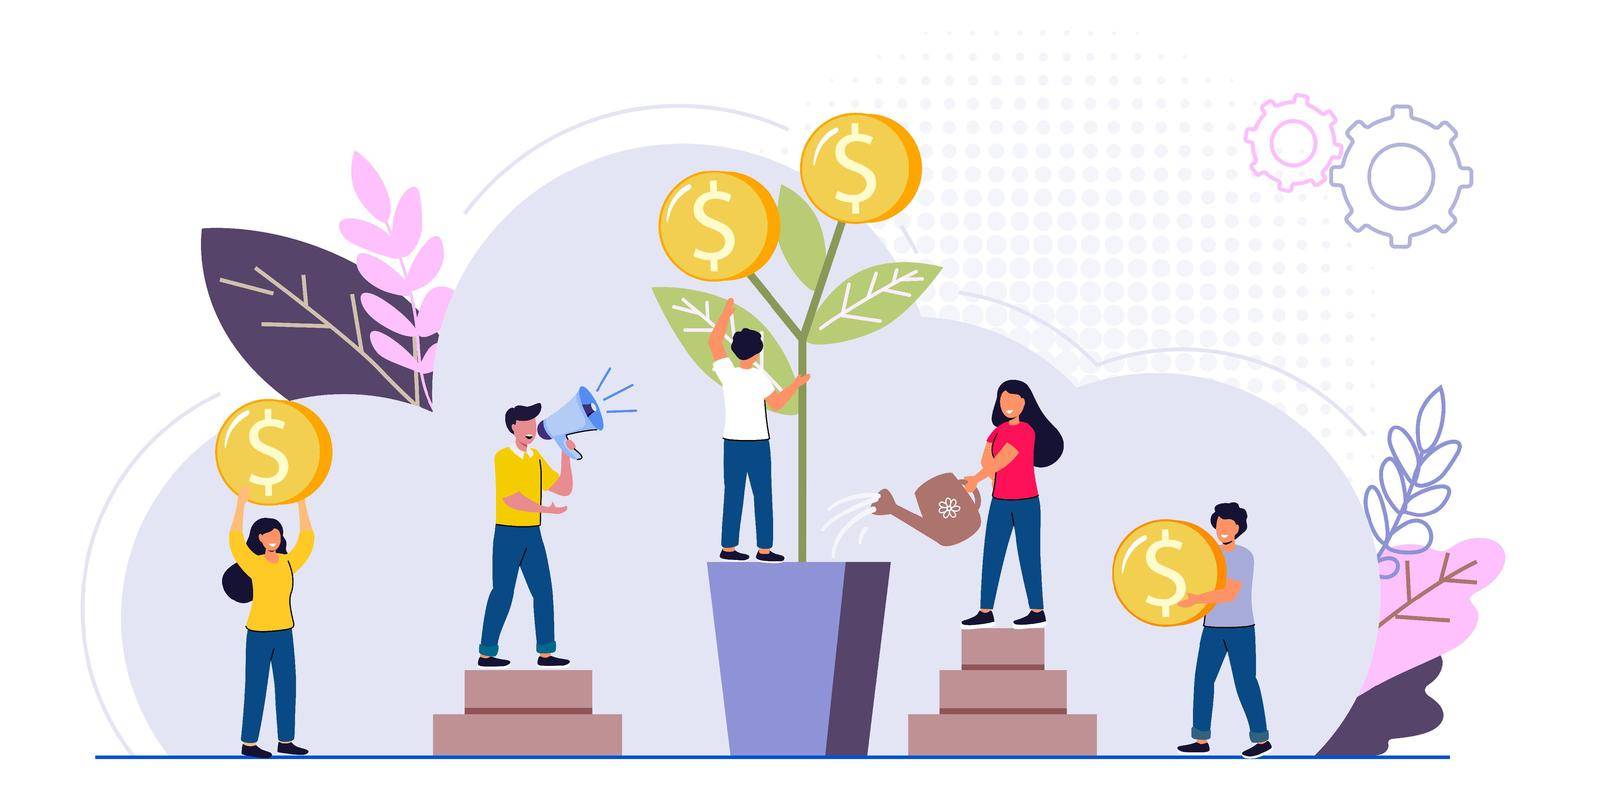 Invest in best idea Investment and analysis money cash profits metaphor Flat design tiny people and business concept for trading. Economical wealth revenue visualized as pile of cash vector illustration